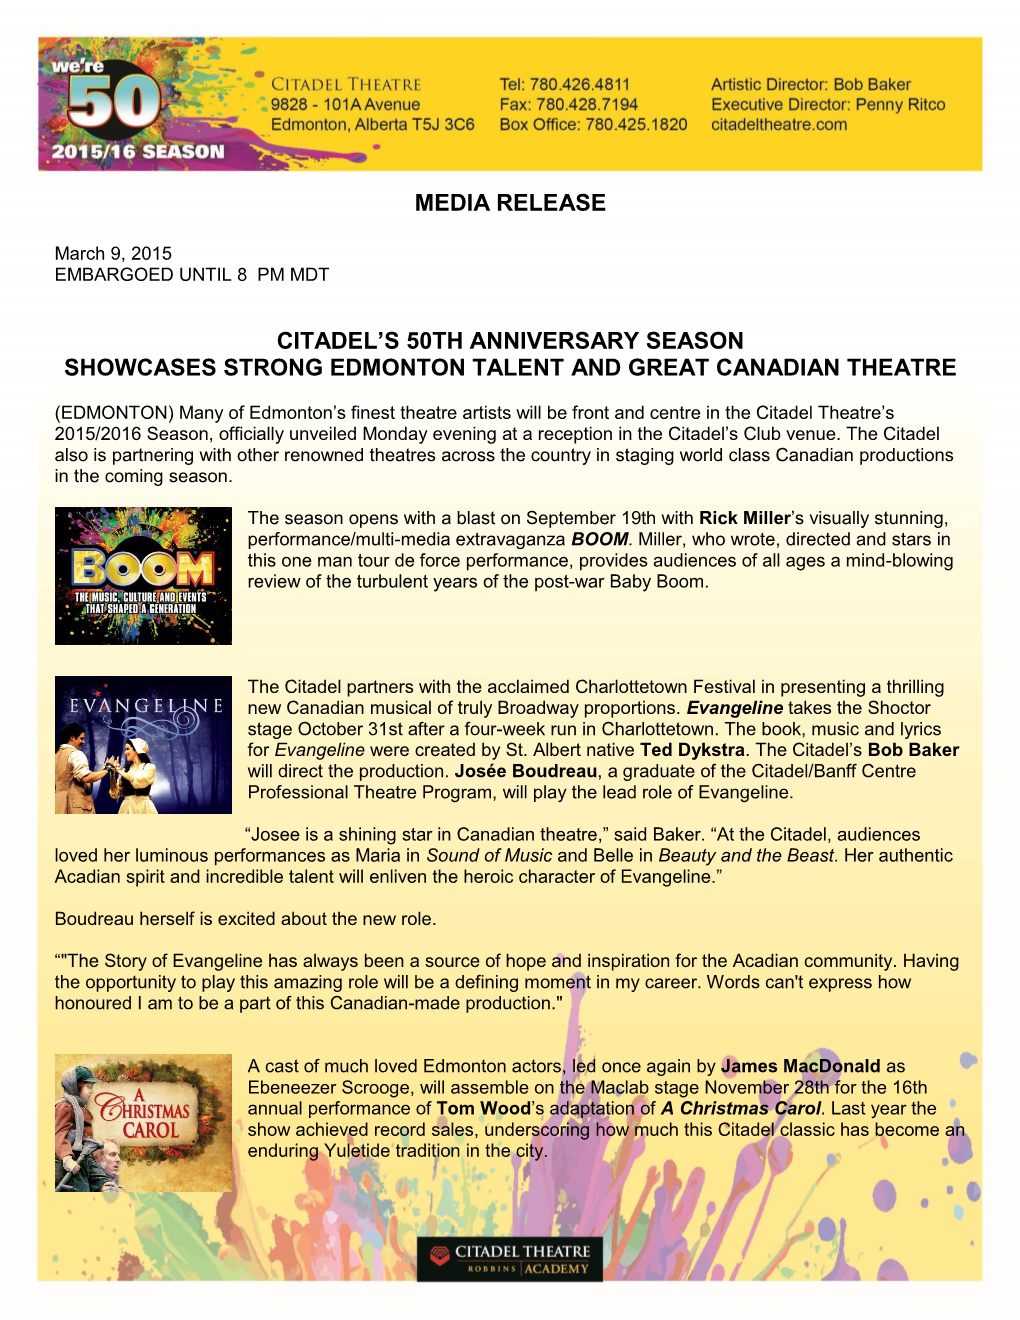 Media Release Citadel's 50Th Anniversary Season Showcases Strong Edmonton Talent and Great Canadian Theatre